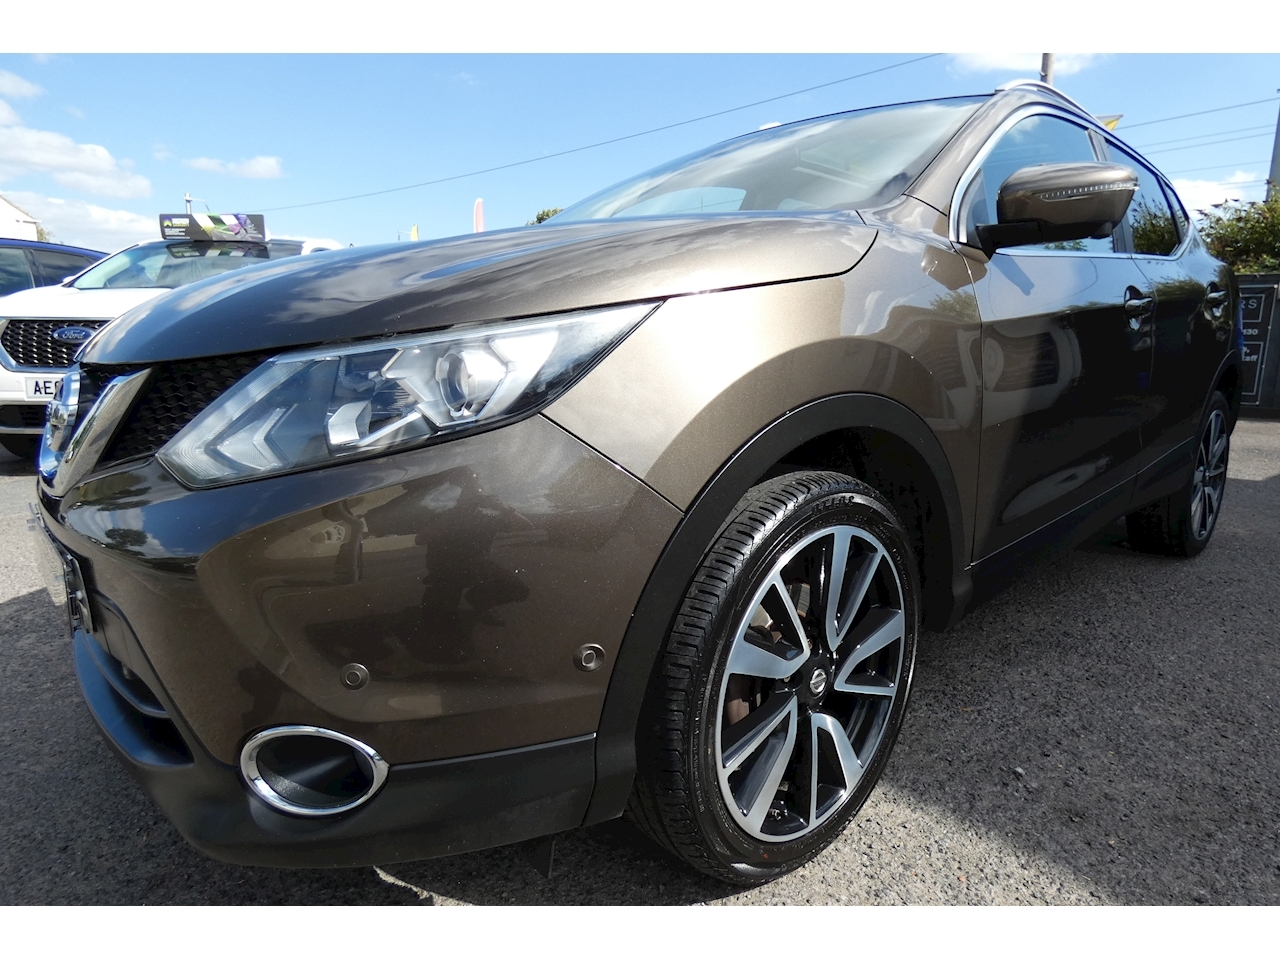 1.5 dCi Tekna SUV 5dr Diesel Manual 2WD Euro 5 (s/s) (110 ps)